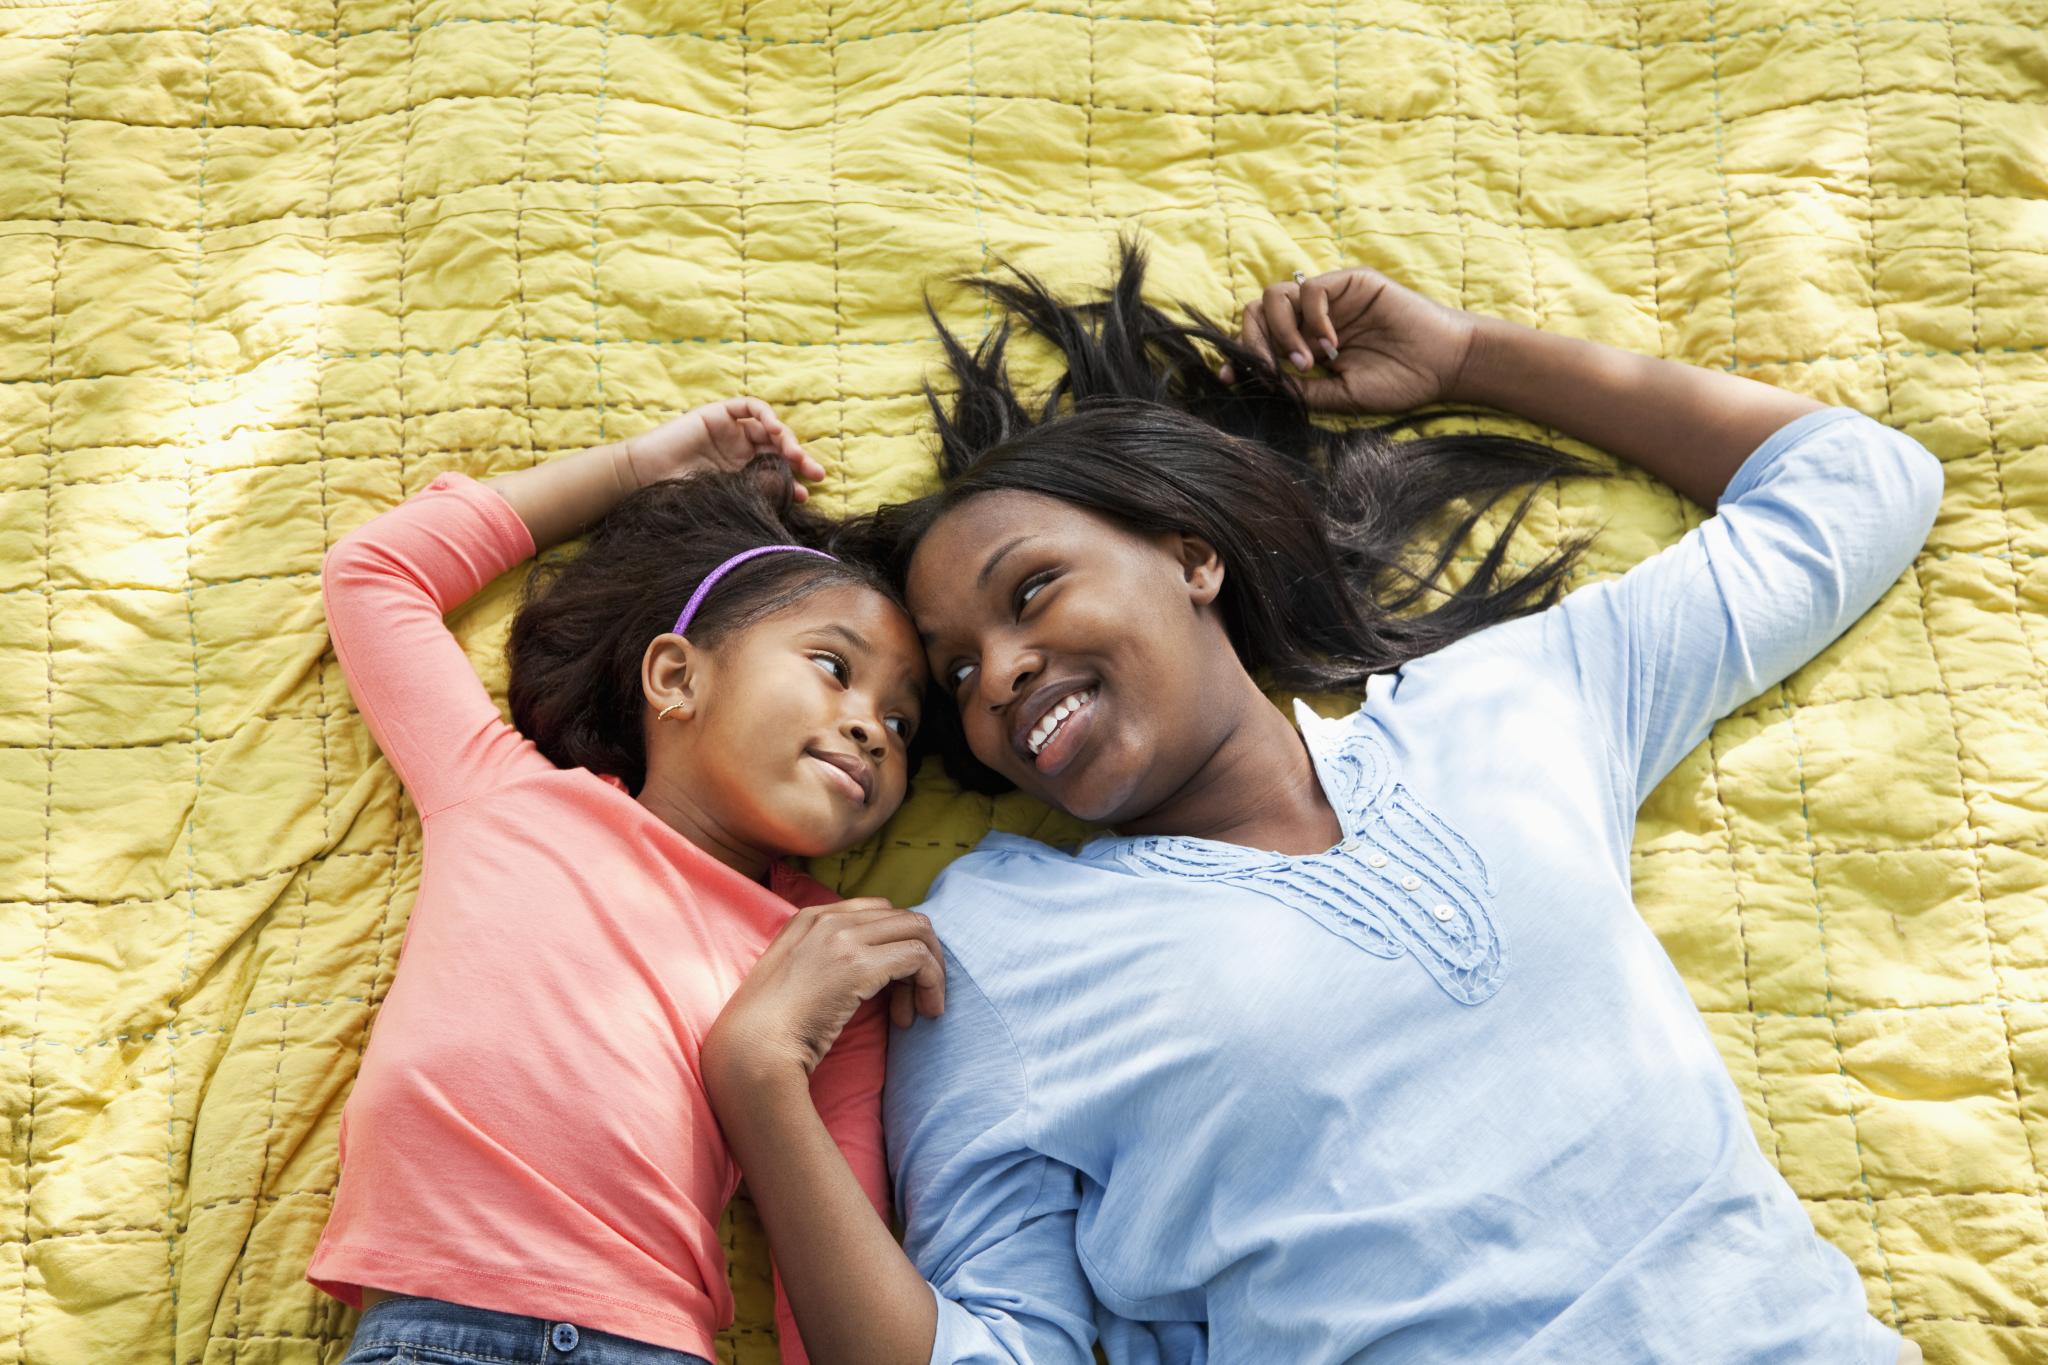 No Shame: Yes, I Have a Therapist (and My Daughter Does, Too)